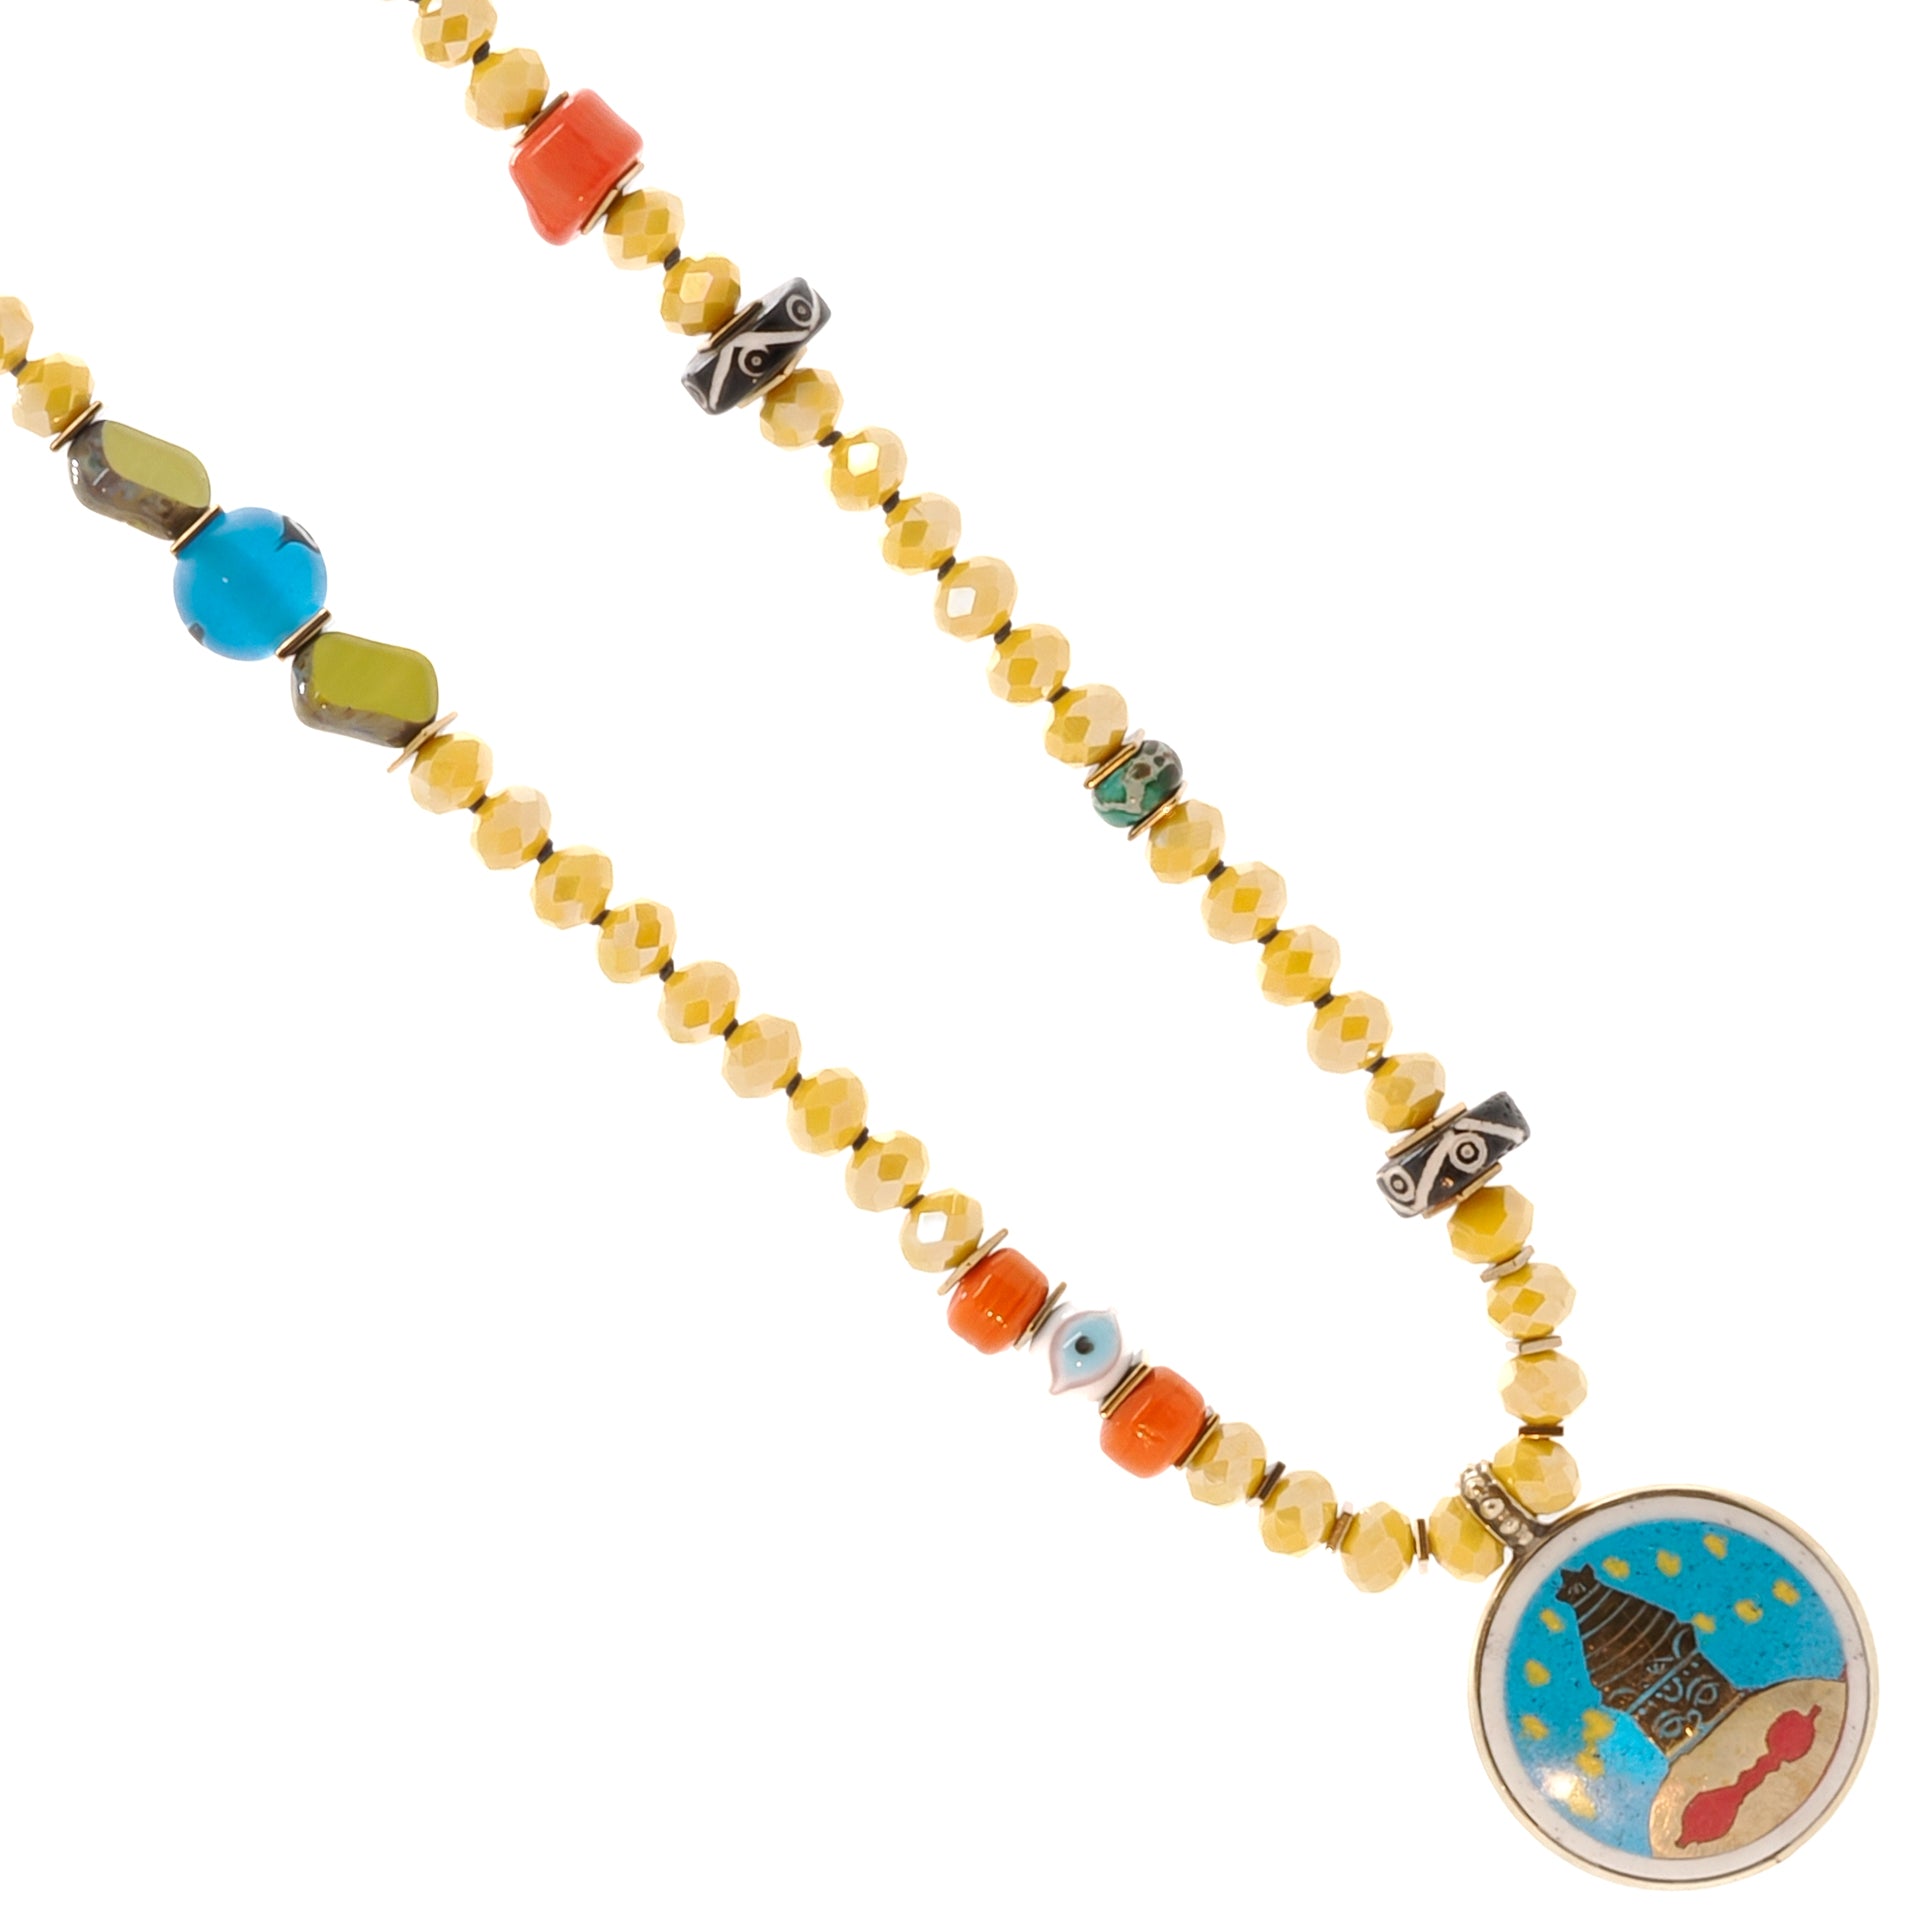 The Yoga Serenity Necklace radiates positive energy and represents the beauty of spiritual connection.